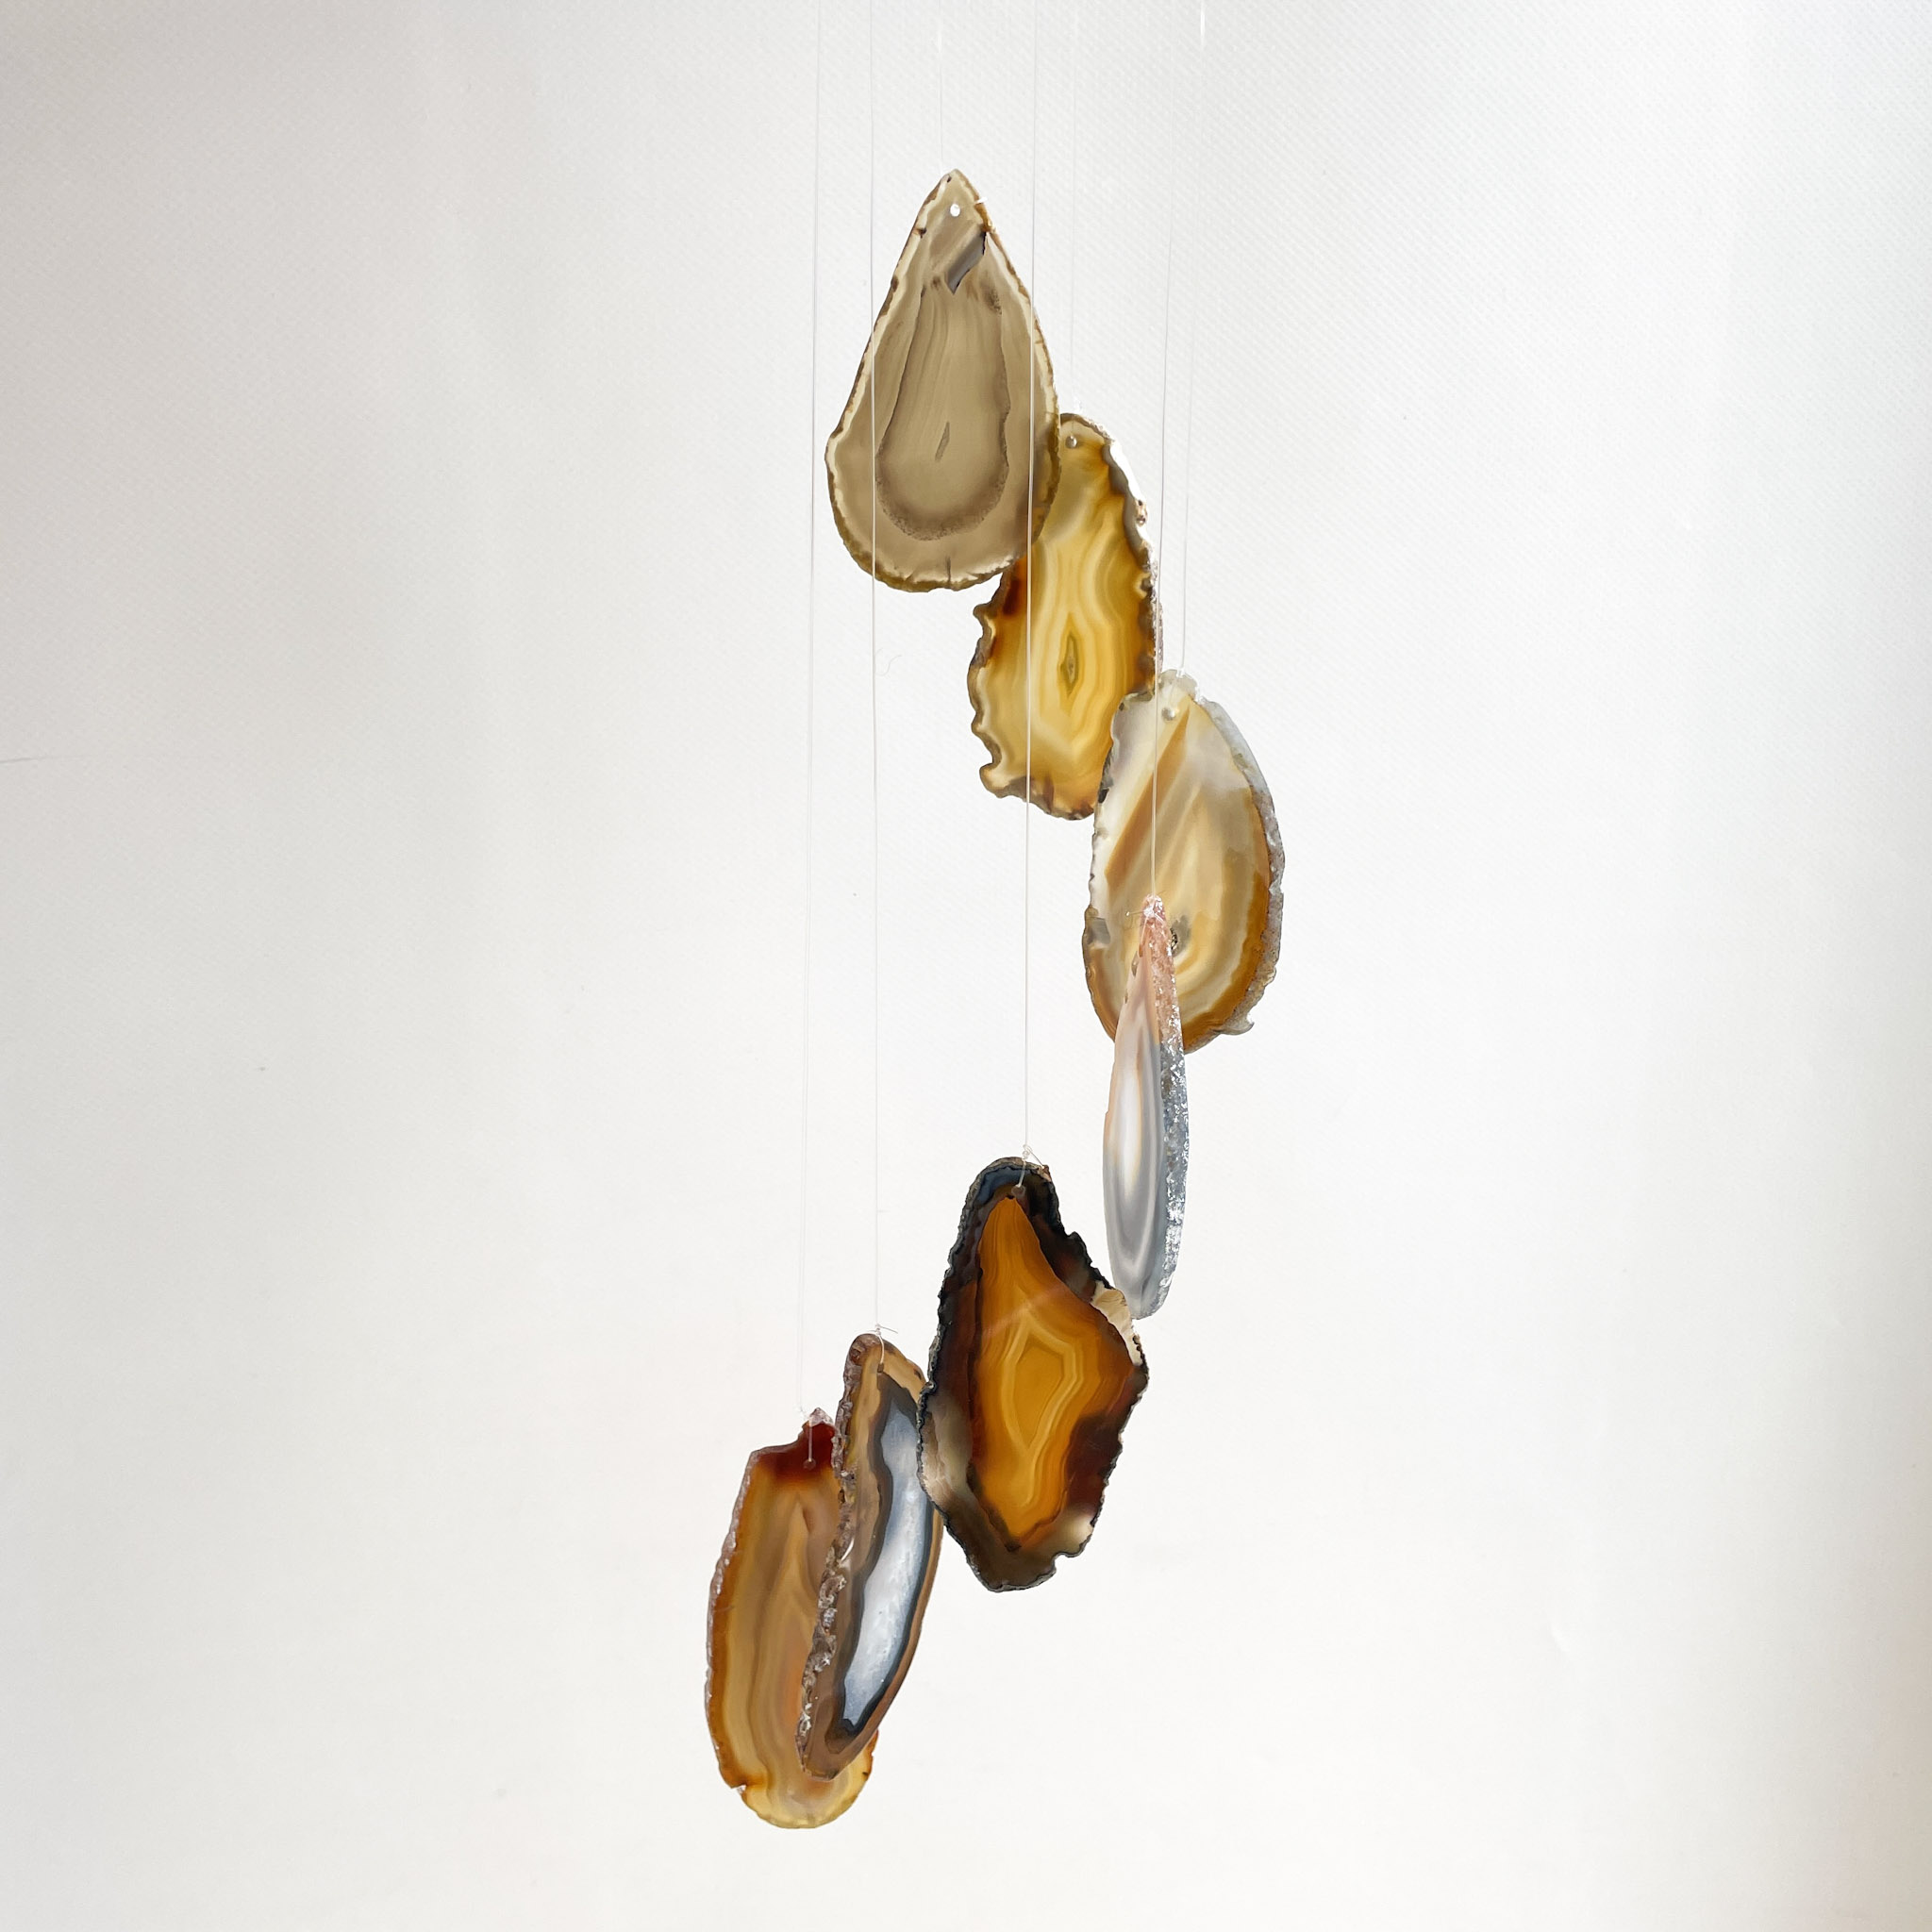 A group of sliced agate stones hanging by thin threads against a white background. The stones display layers of brown, beige, and creamy white with natural ridged edges.